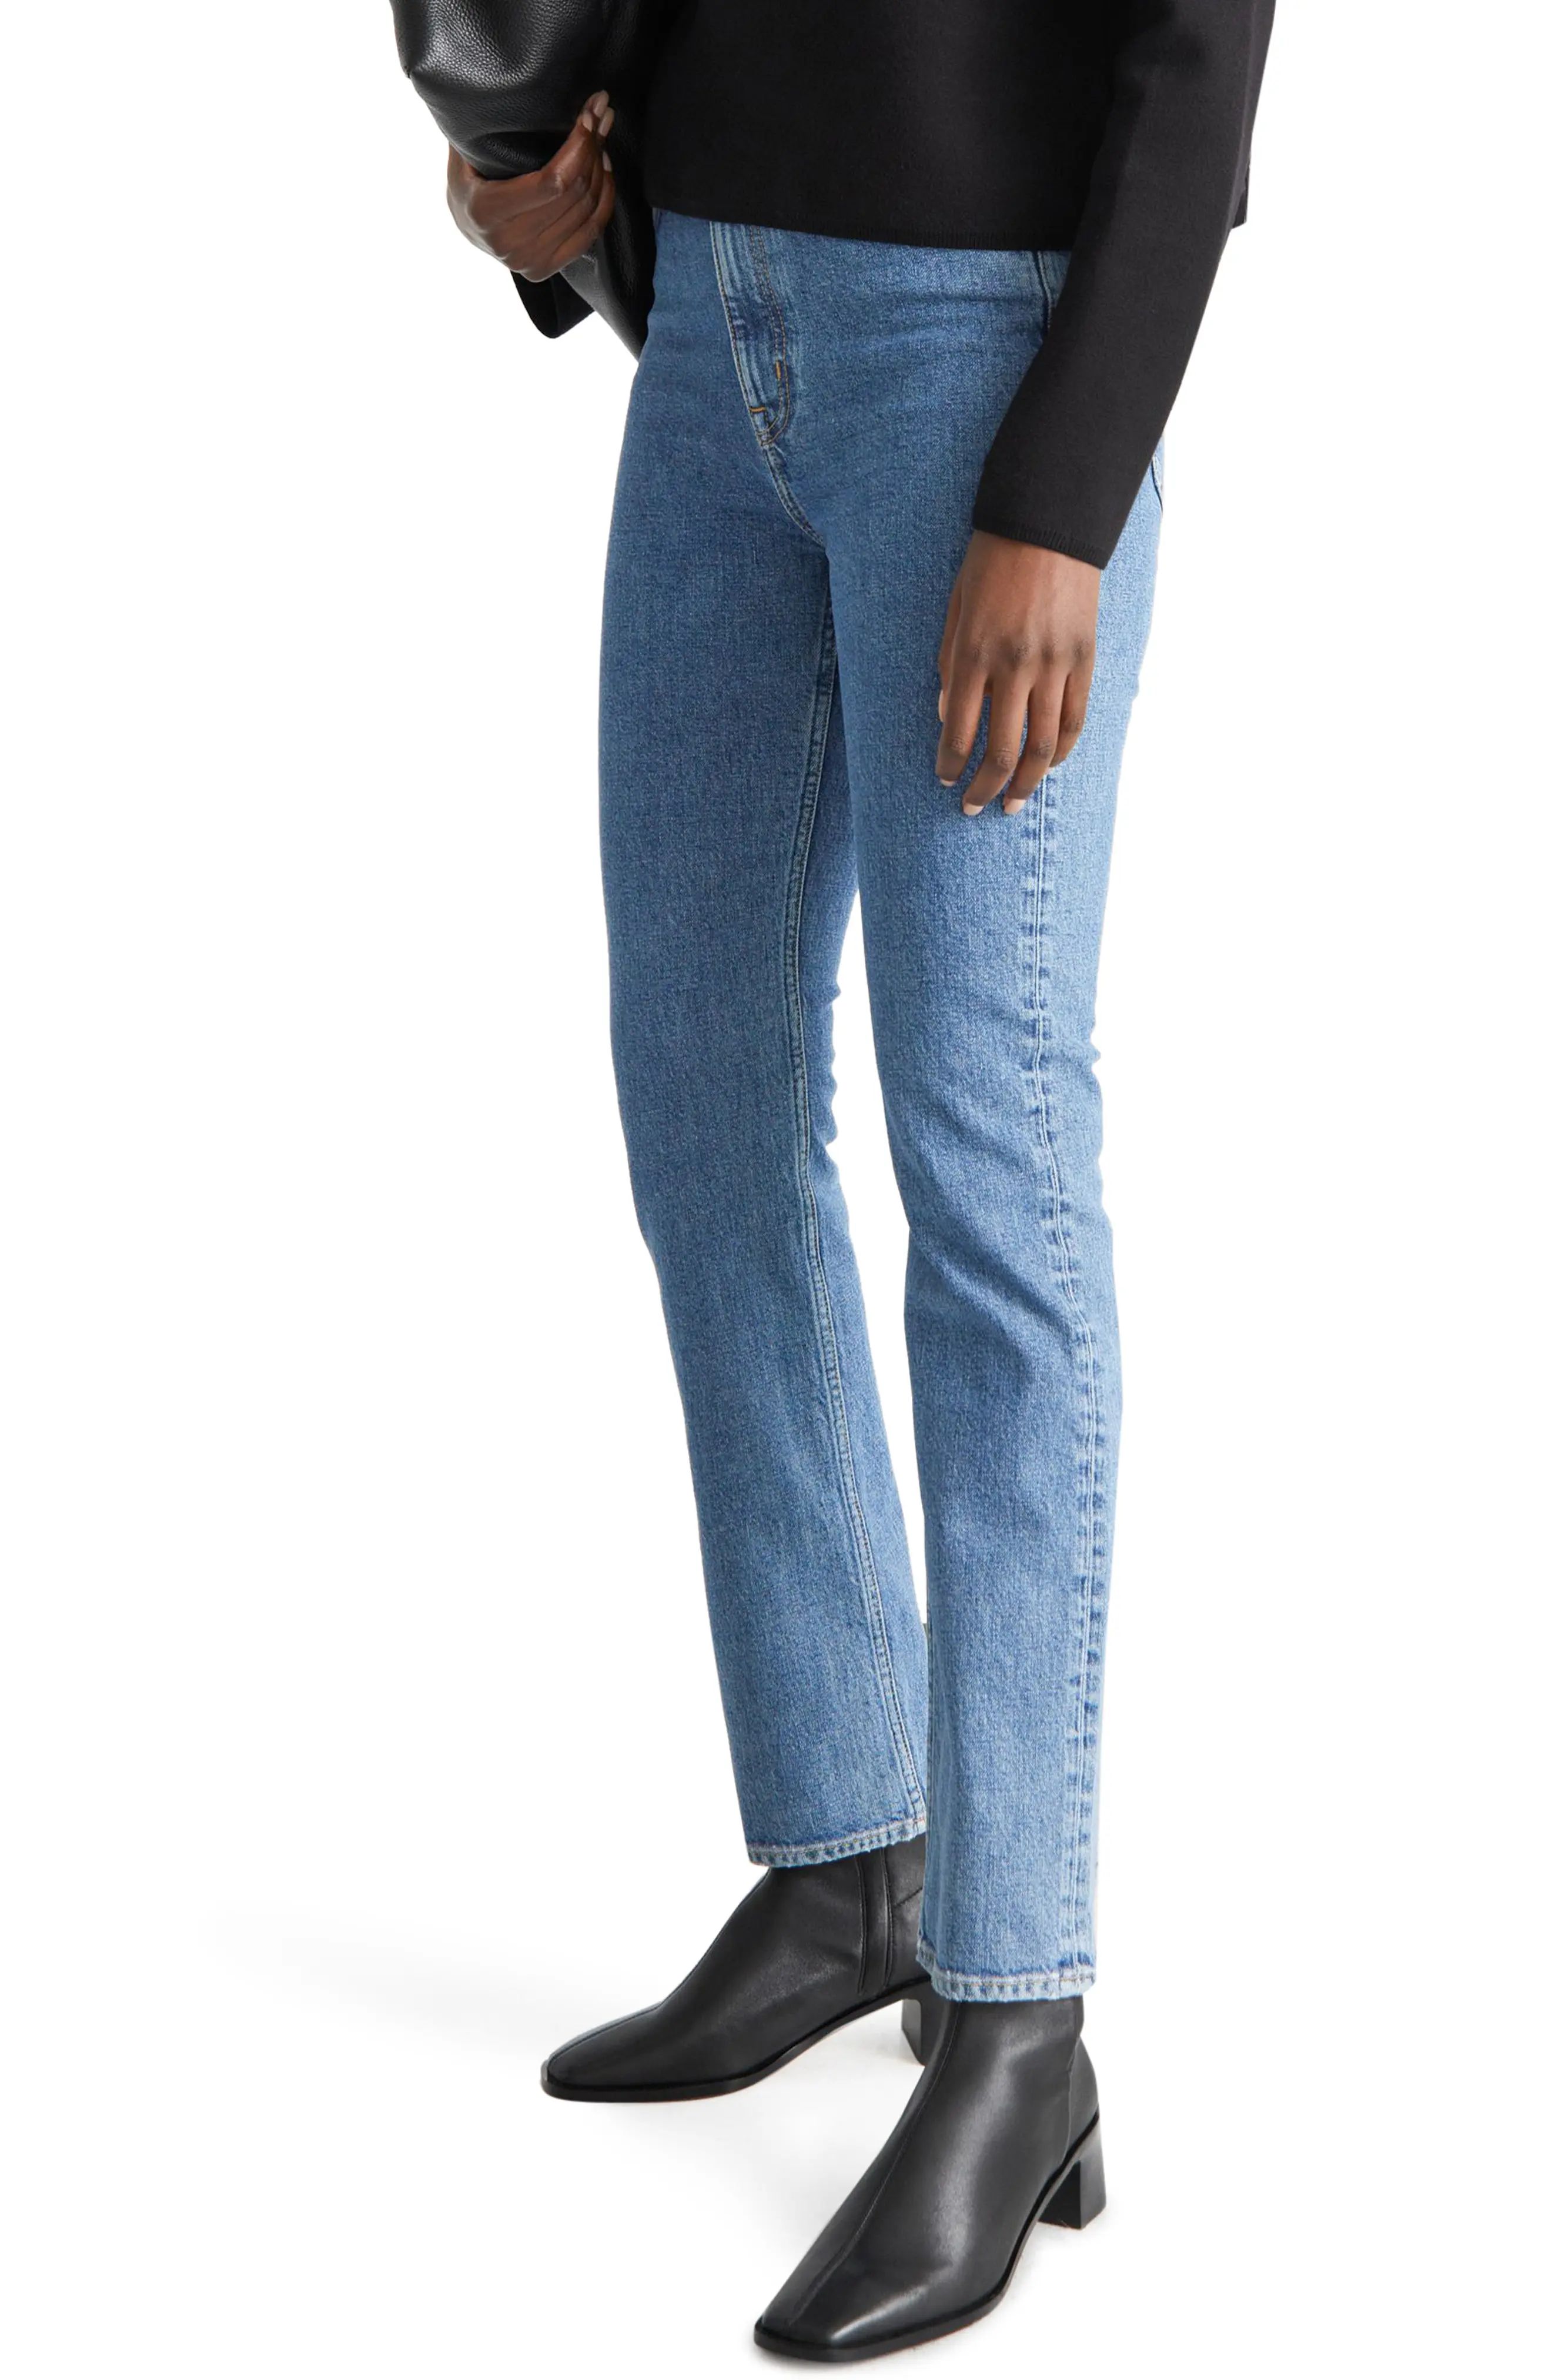 & Other Stories Straight Leg Jeans in Vikas Blue at Nordstrom, Size 27 | Nordstrom